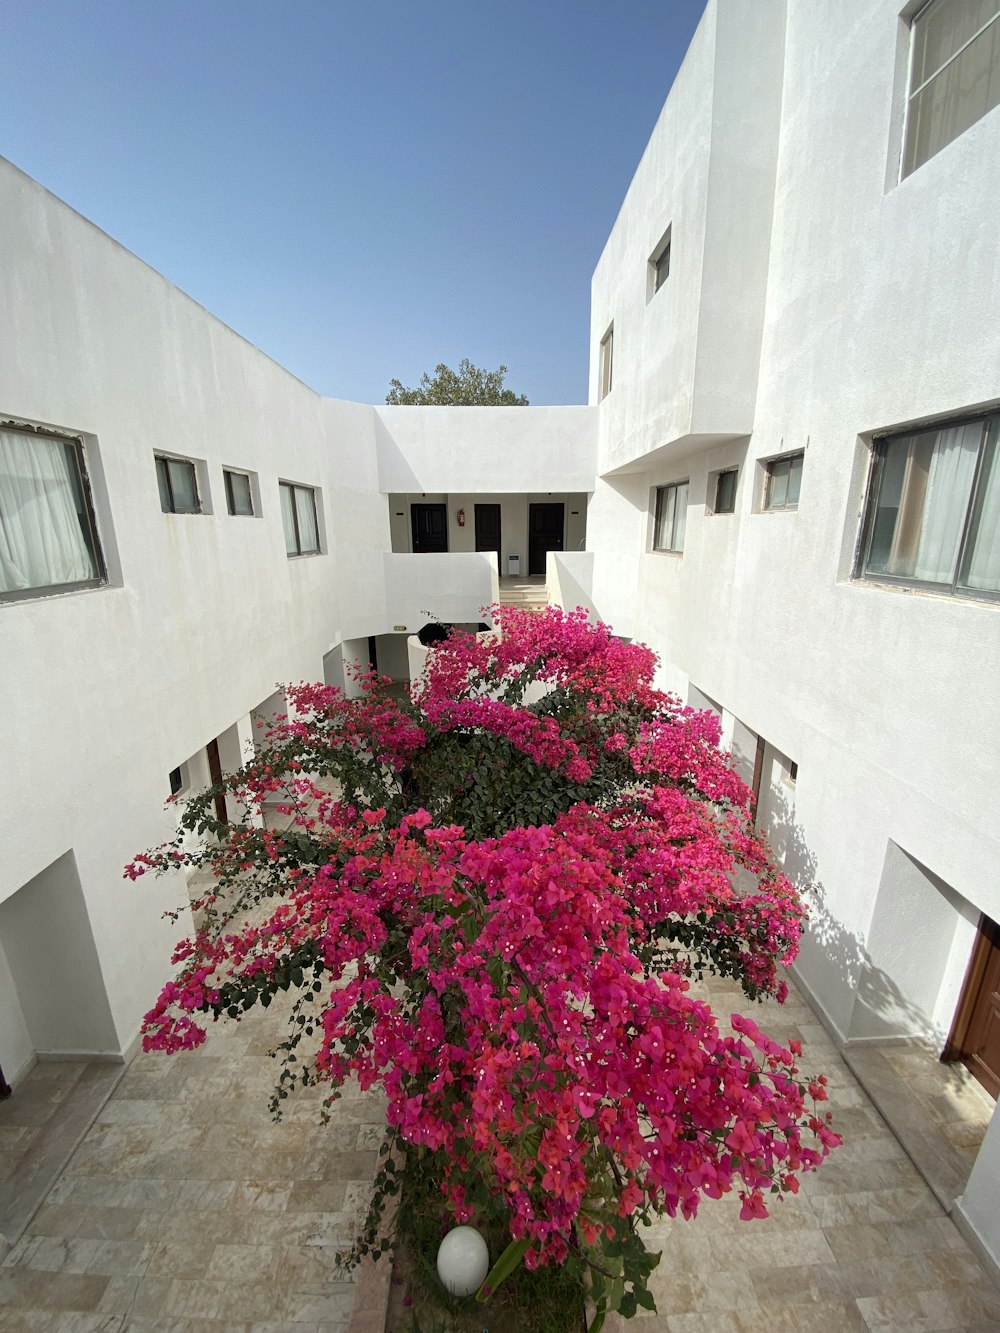 a potted plant with pink flowers in a courtyard